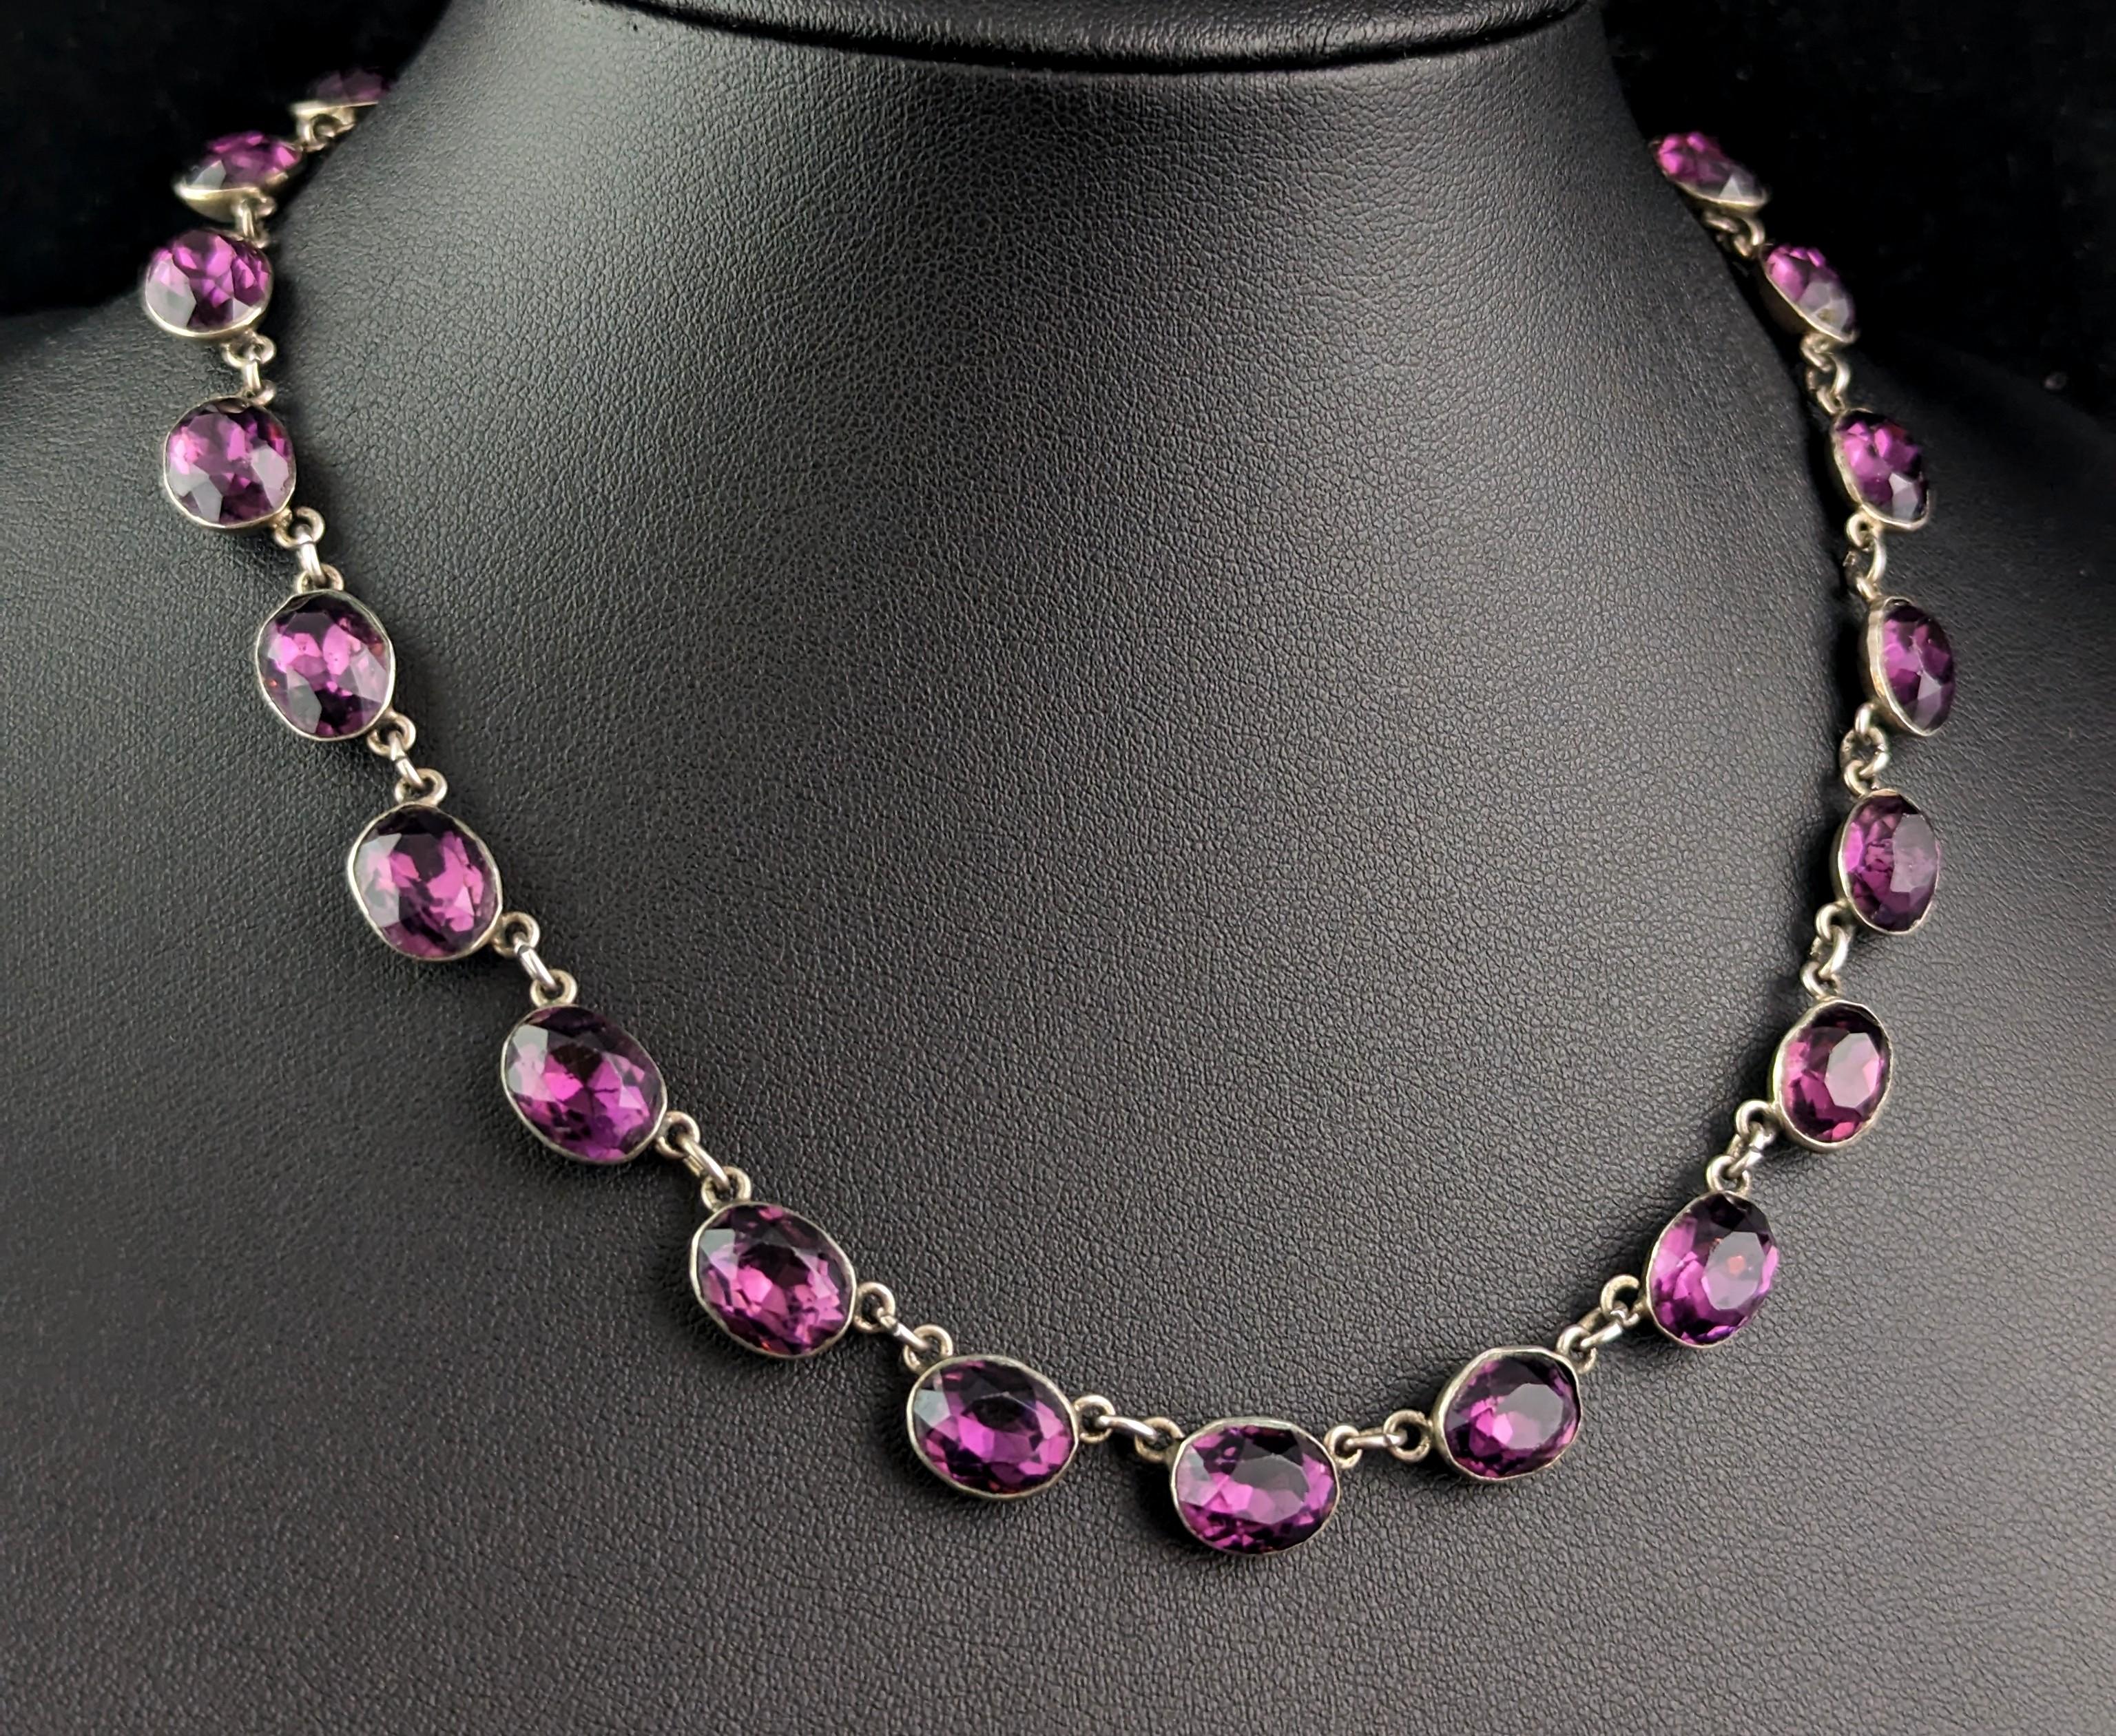 A tremendously good antique riviere necklace.

Early Victorian era this beautiful antique riviere necklace borrows much of its design elements from the Georgian era, it showcases wonderfully rich purple paste stones resembling amethyst, in closed